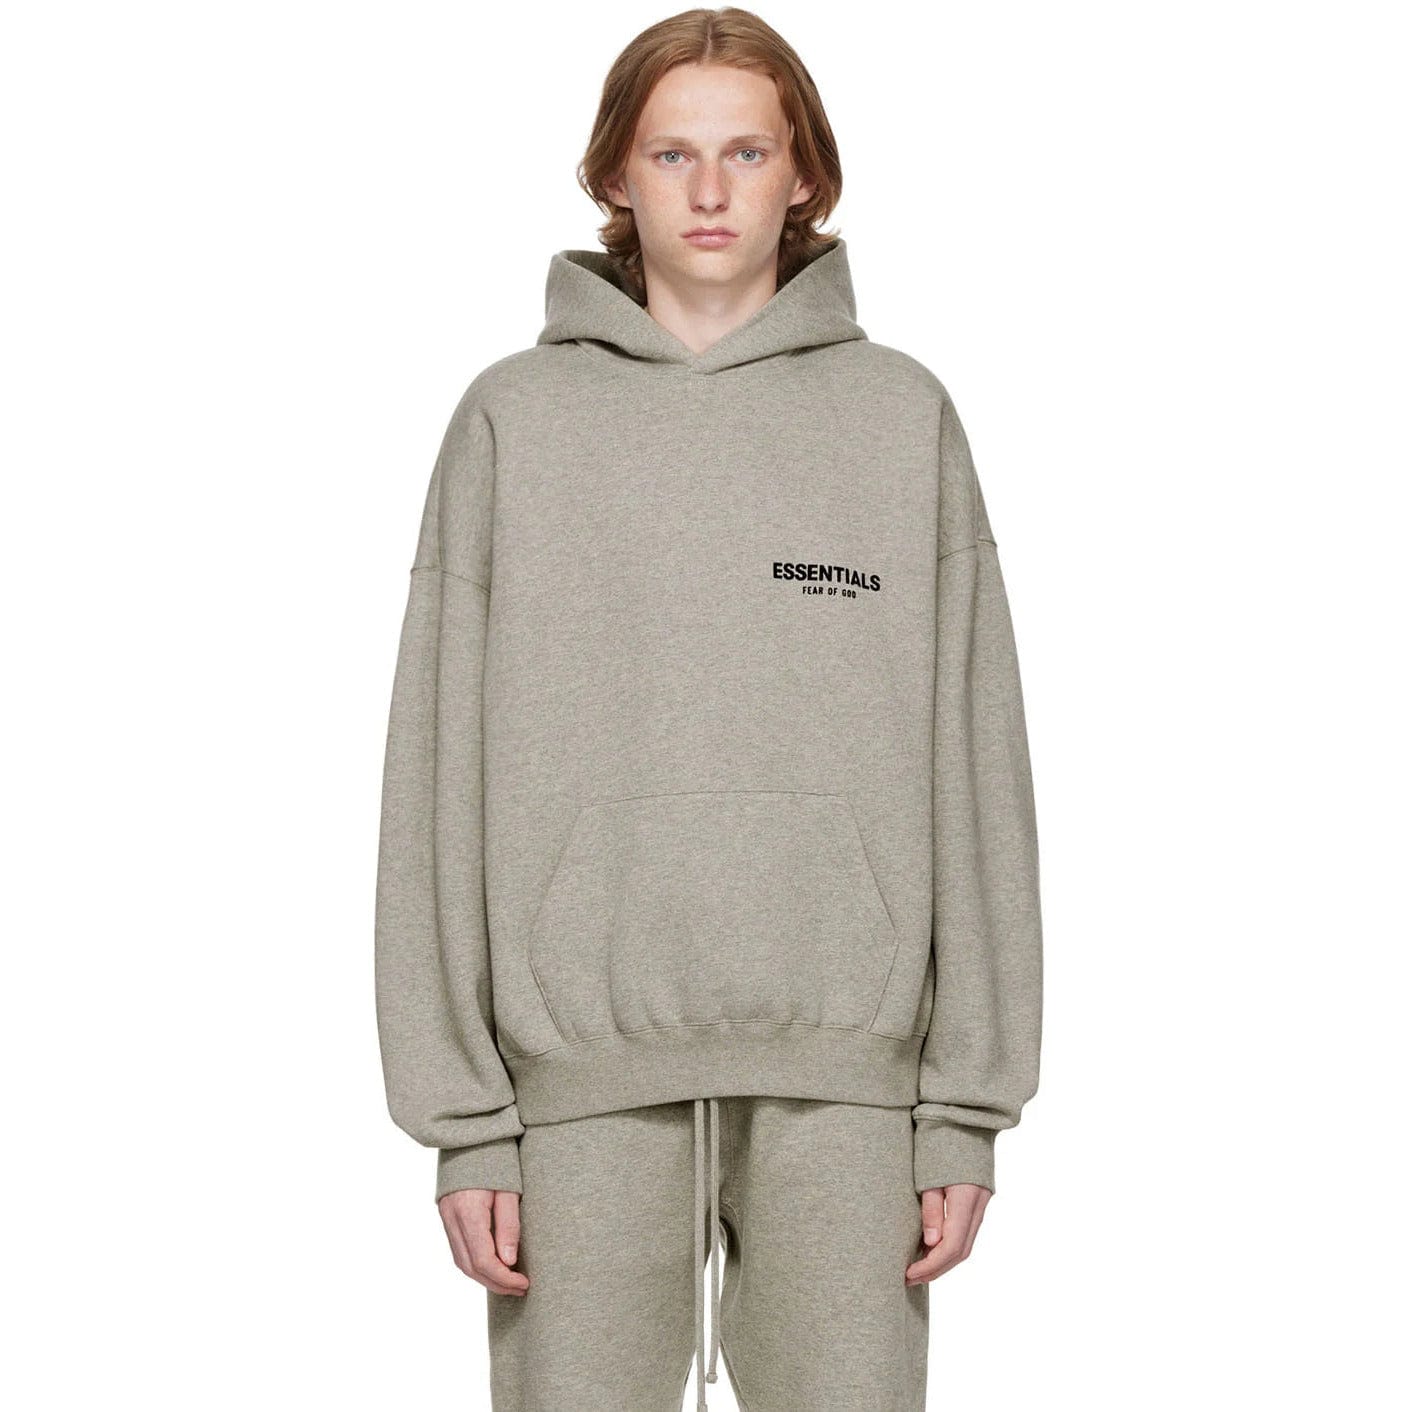 Fear of God Essentials Hoodie - Core Collection Dark Oatmeal